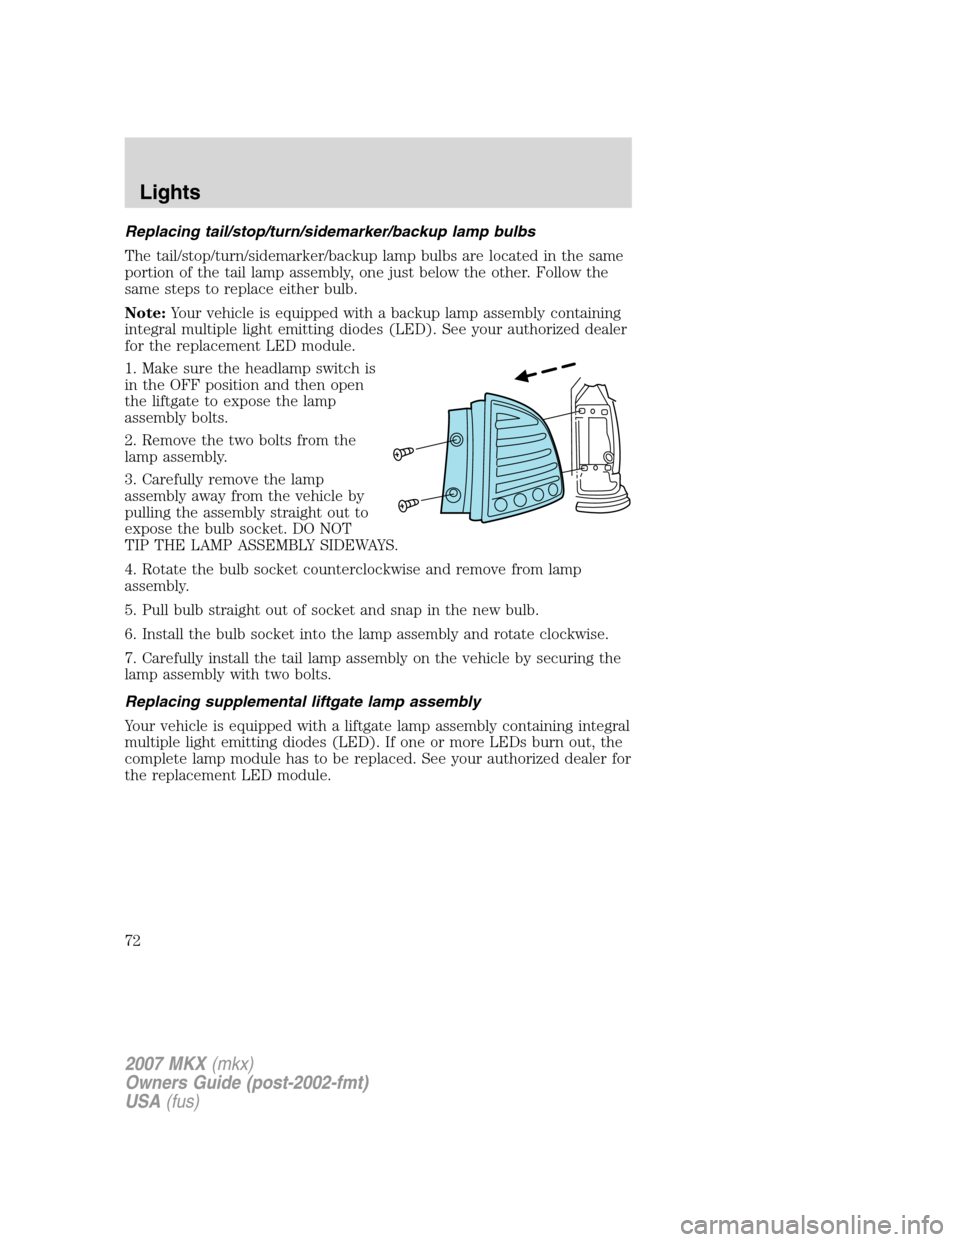 LINCOLN MKX 2007  Owners Manual Replacing tail/stop/turn/sidemarker/backup lamp bulbs
The tail/stop/turn/sidemarker/backup lamp bulbs are located in the same
portion of the tail lamp assembly, one just below the other. Follow the
sa